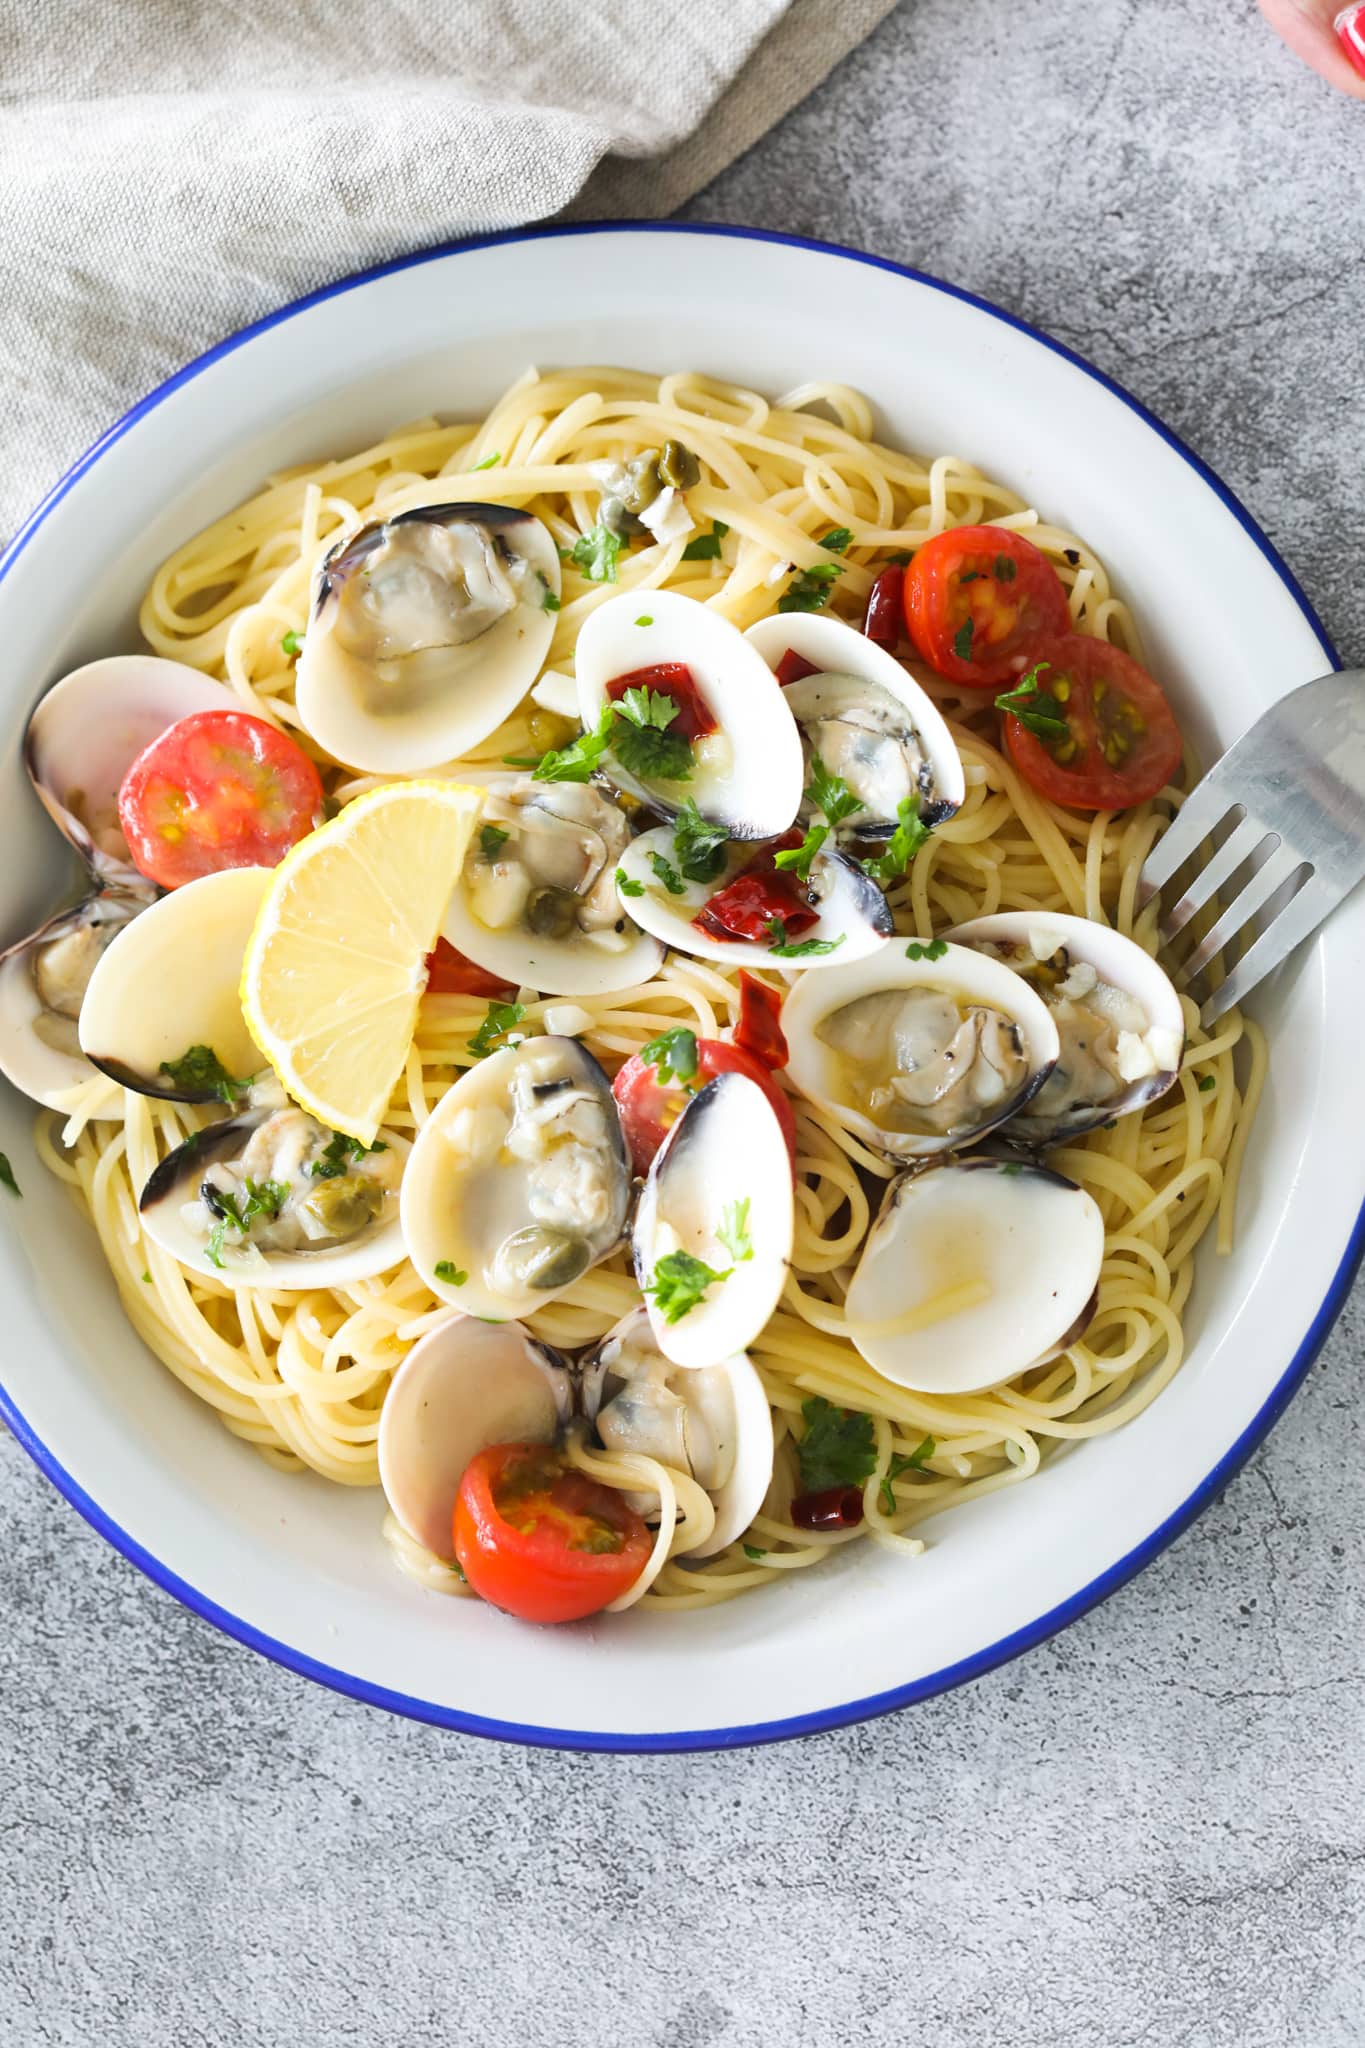 Capellini with clams served in a plate.